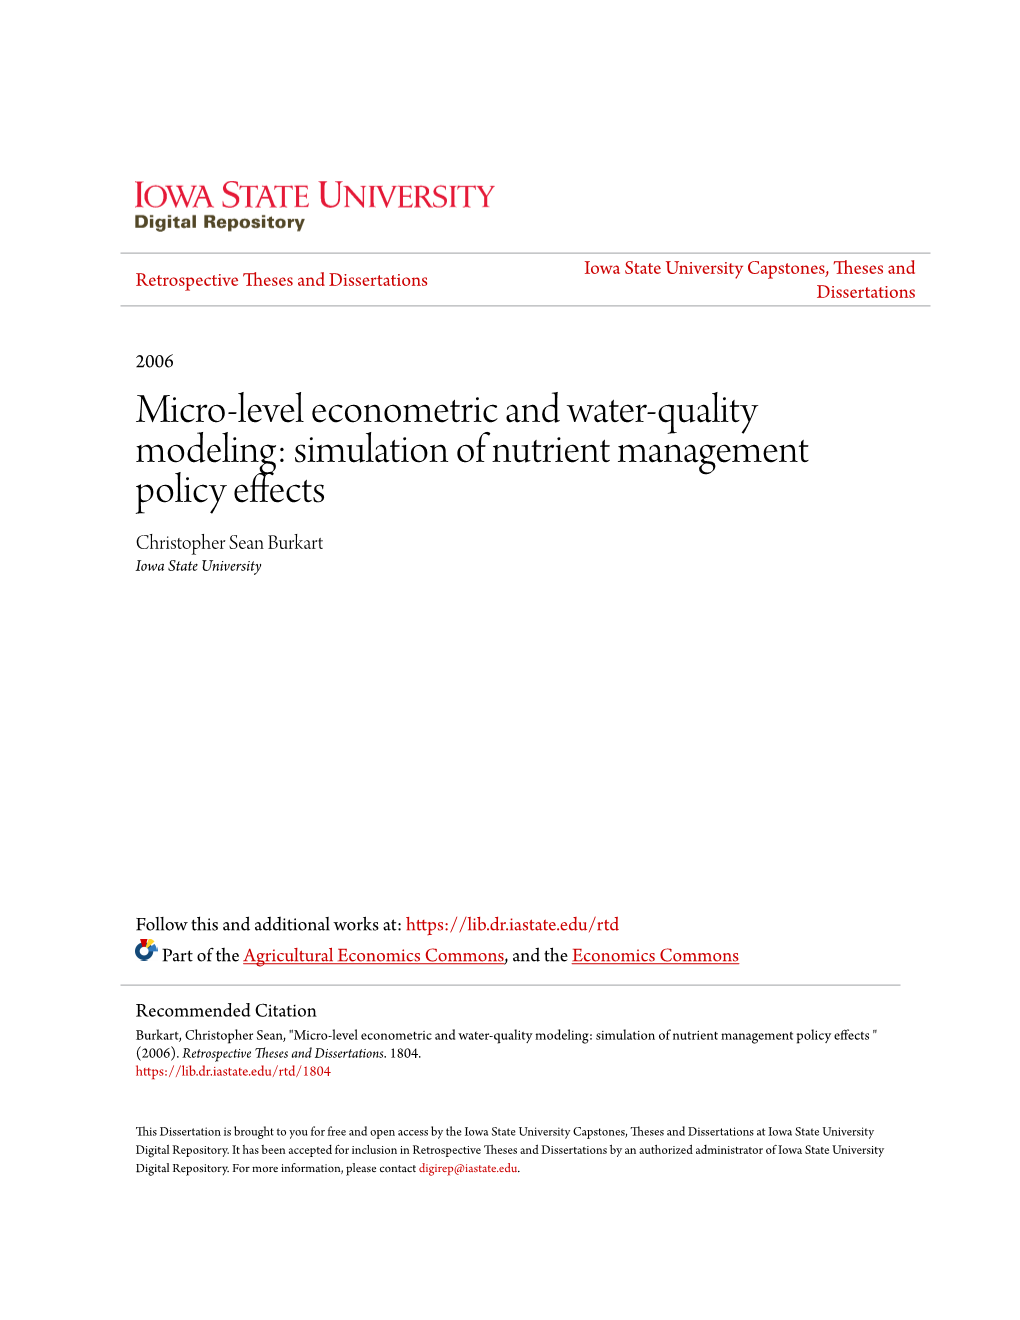 Micro-Level Econometric and Water-Quality Modeling: Simulation of Nutrient Management Policy Effects Christopher Sean Burkart Iowa State University